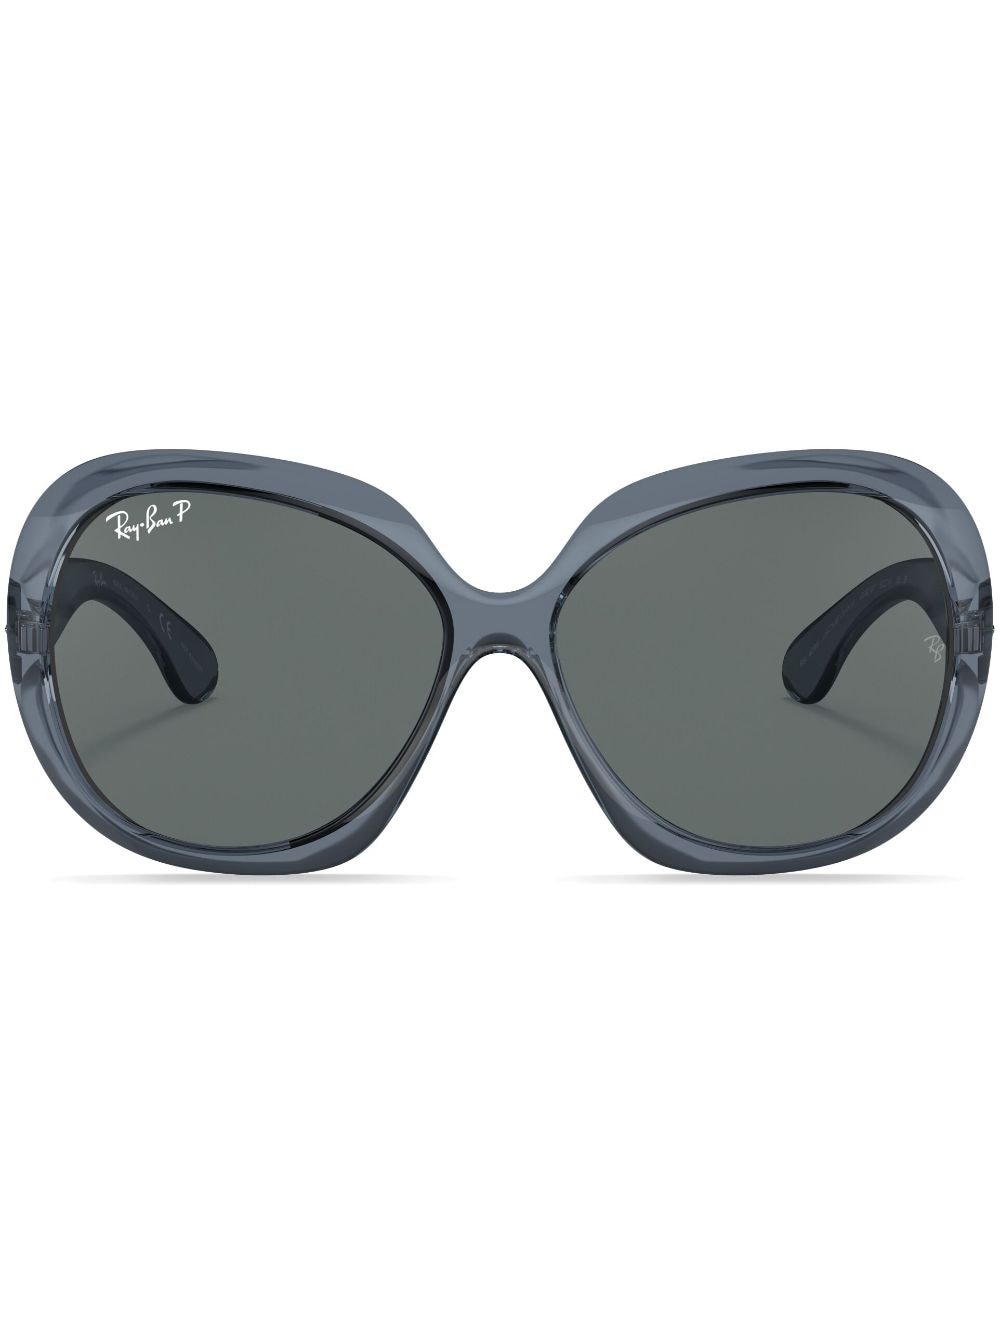 Ray-Ban Jackie Ohh II tinted sunglasses - Blue von Ray-Ban